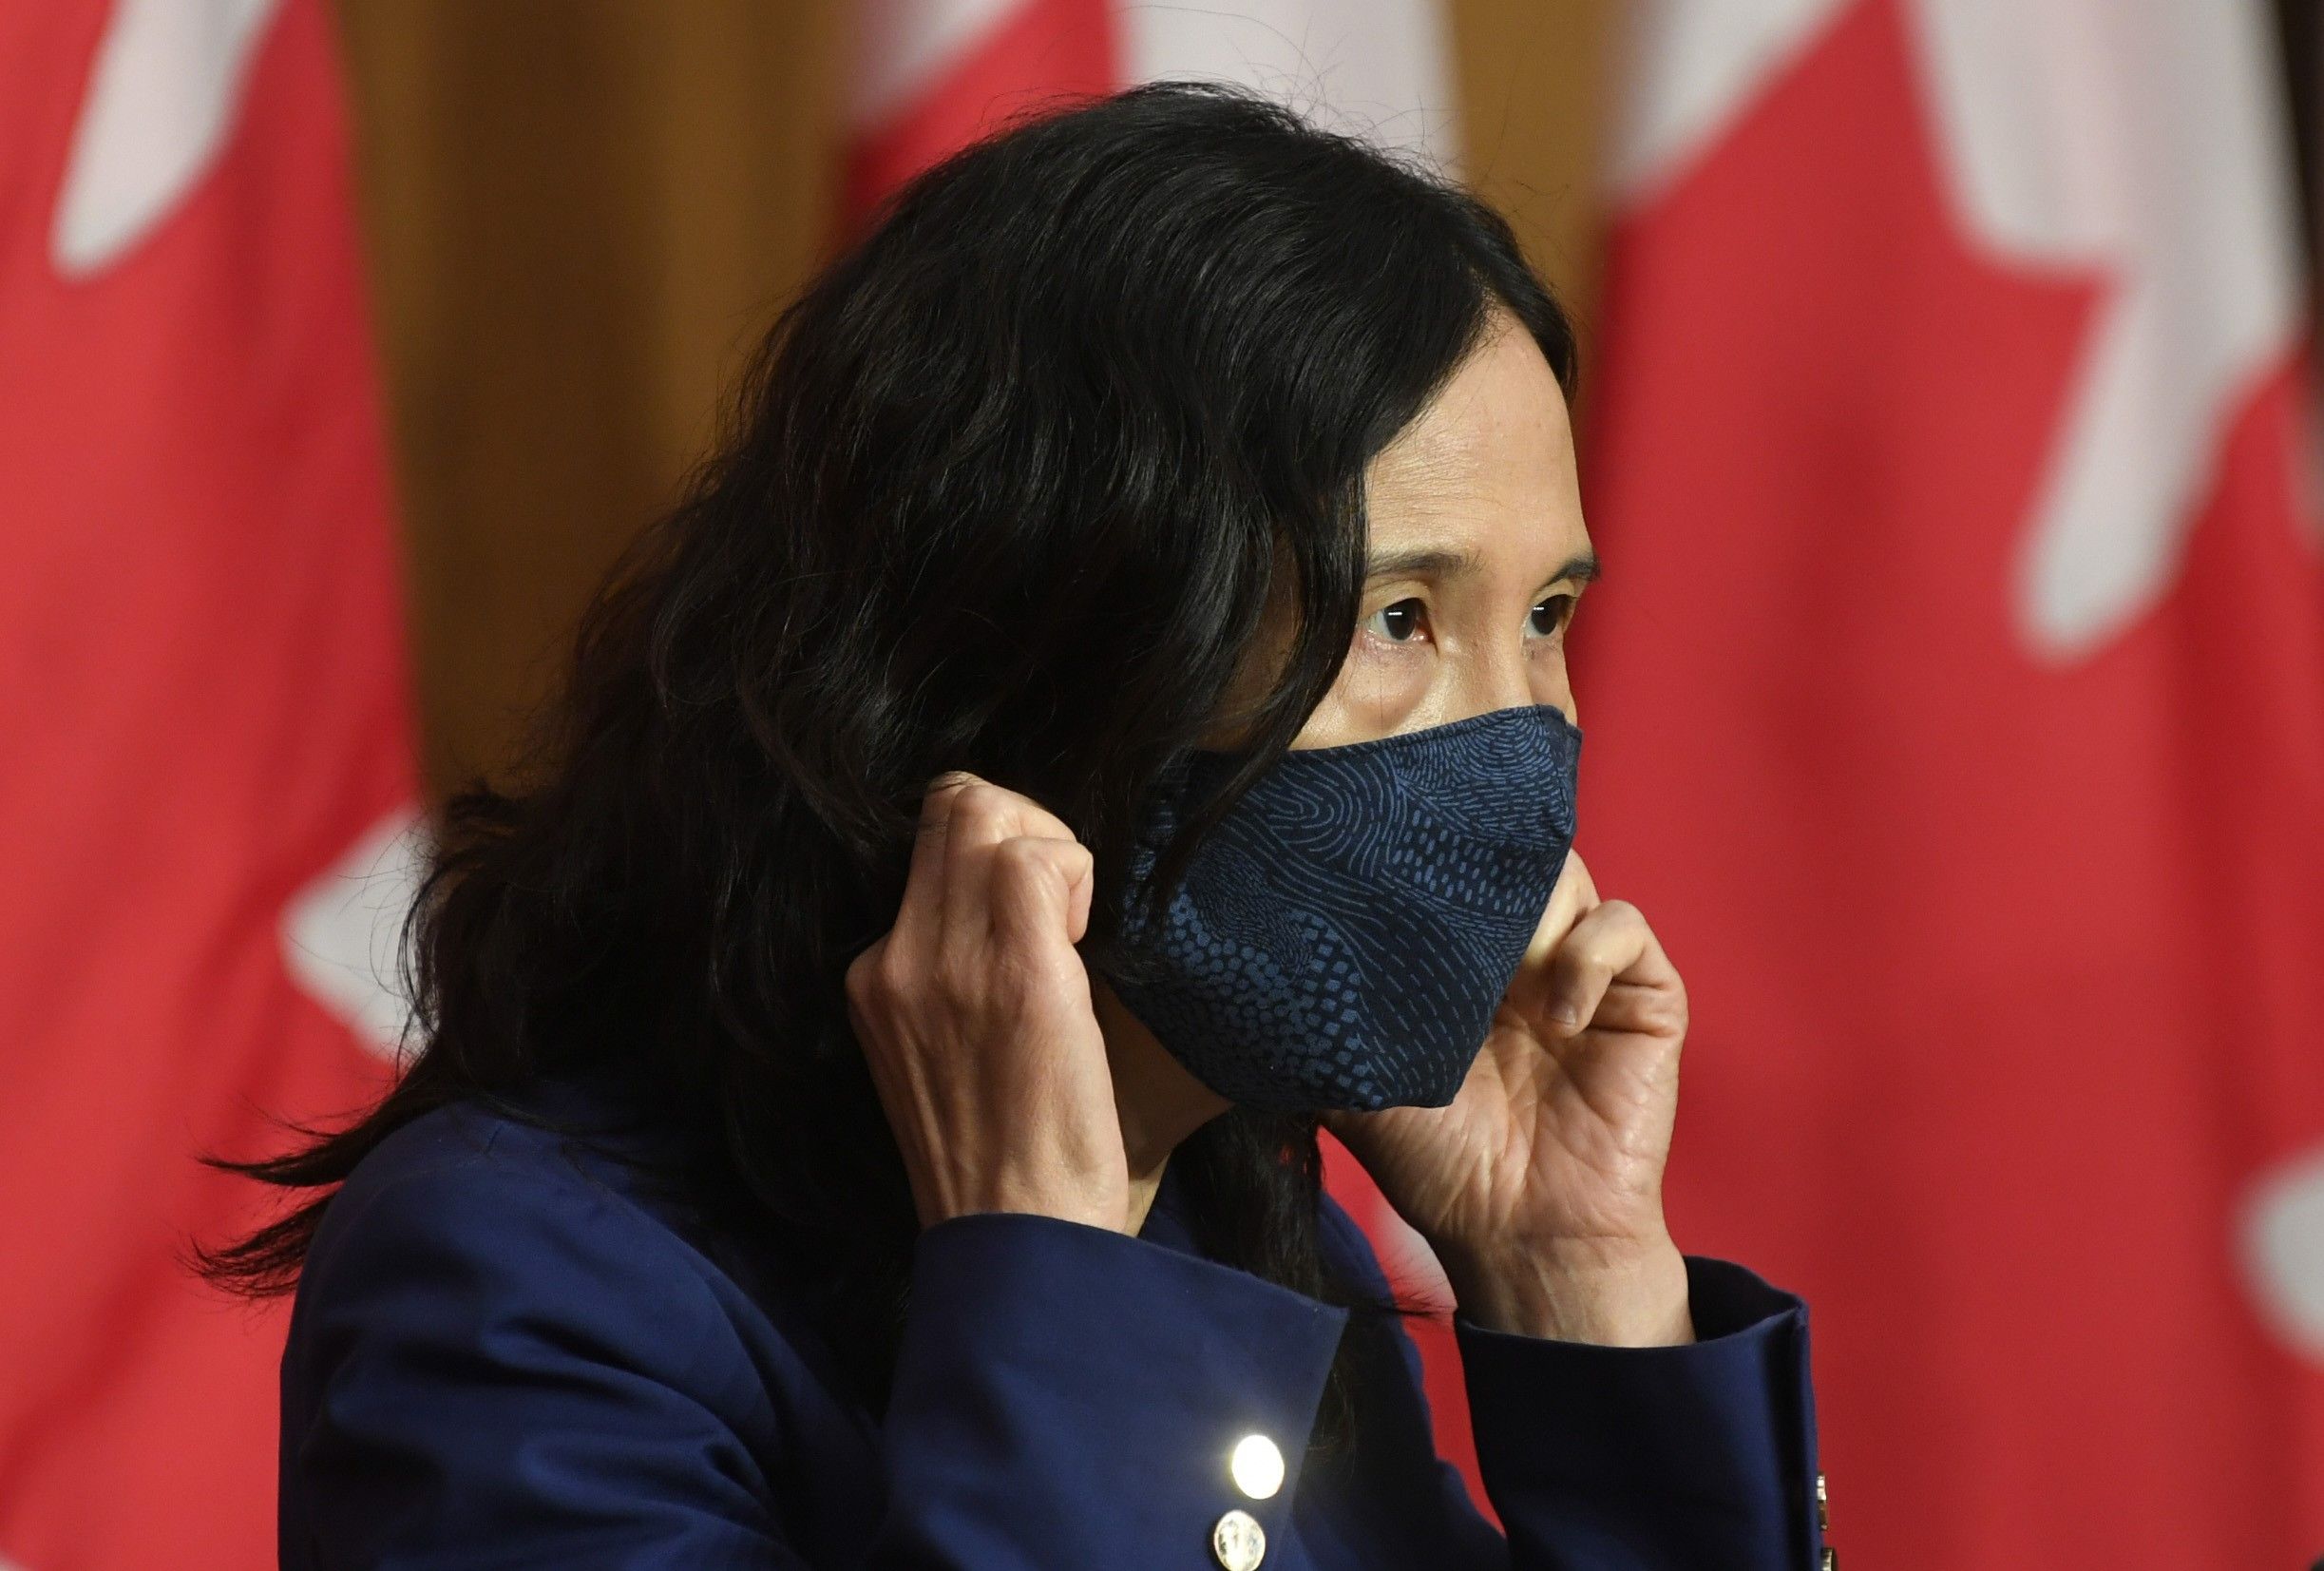 Chief Public Health Officer Theresa Tam removes her mask as she arrives for a news conference Friday, October 2, 2020 in Ottawa.  